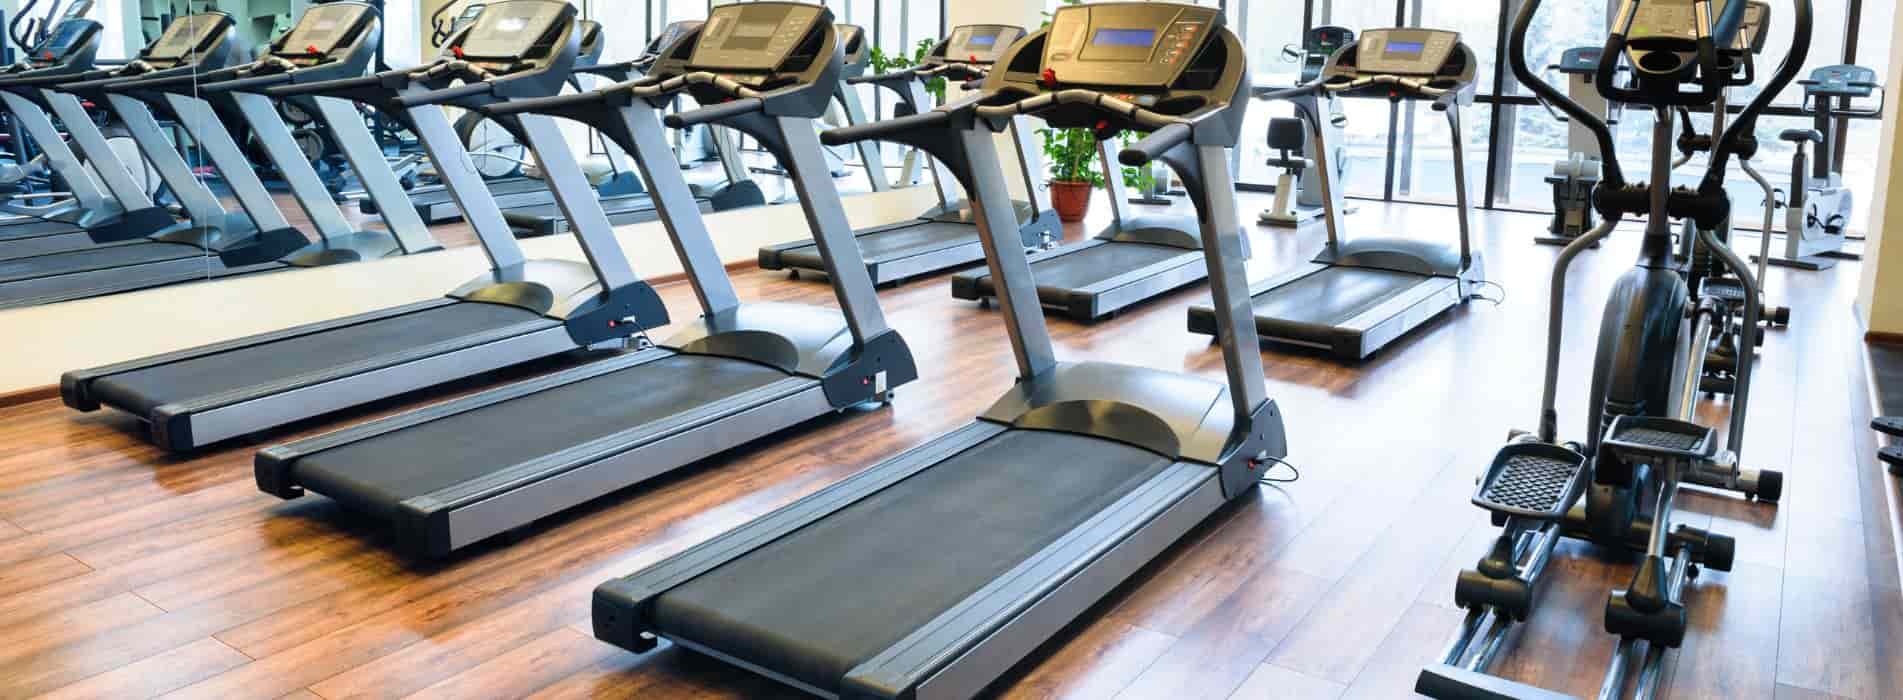 Treadmill exercise for weight loss